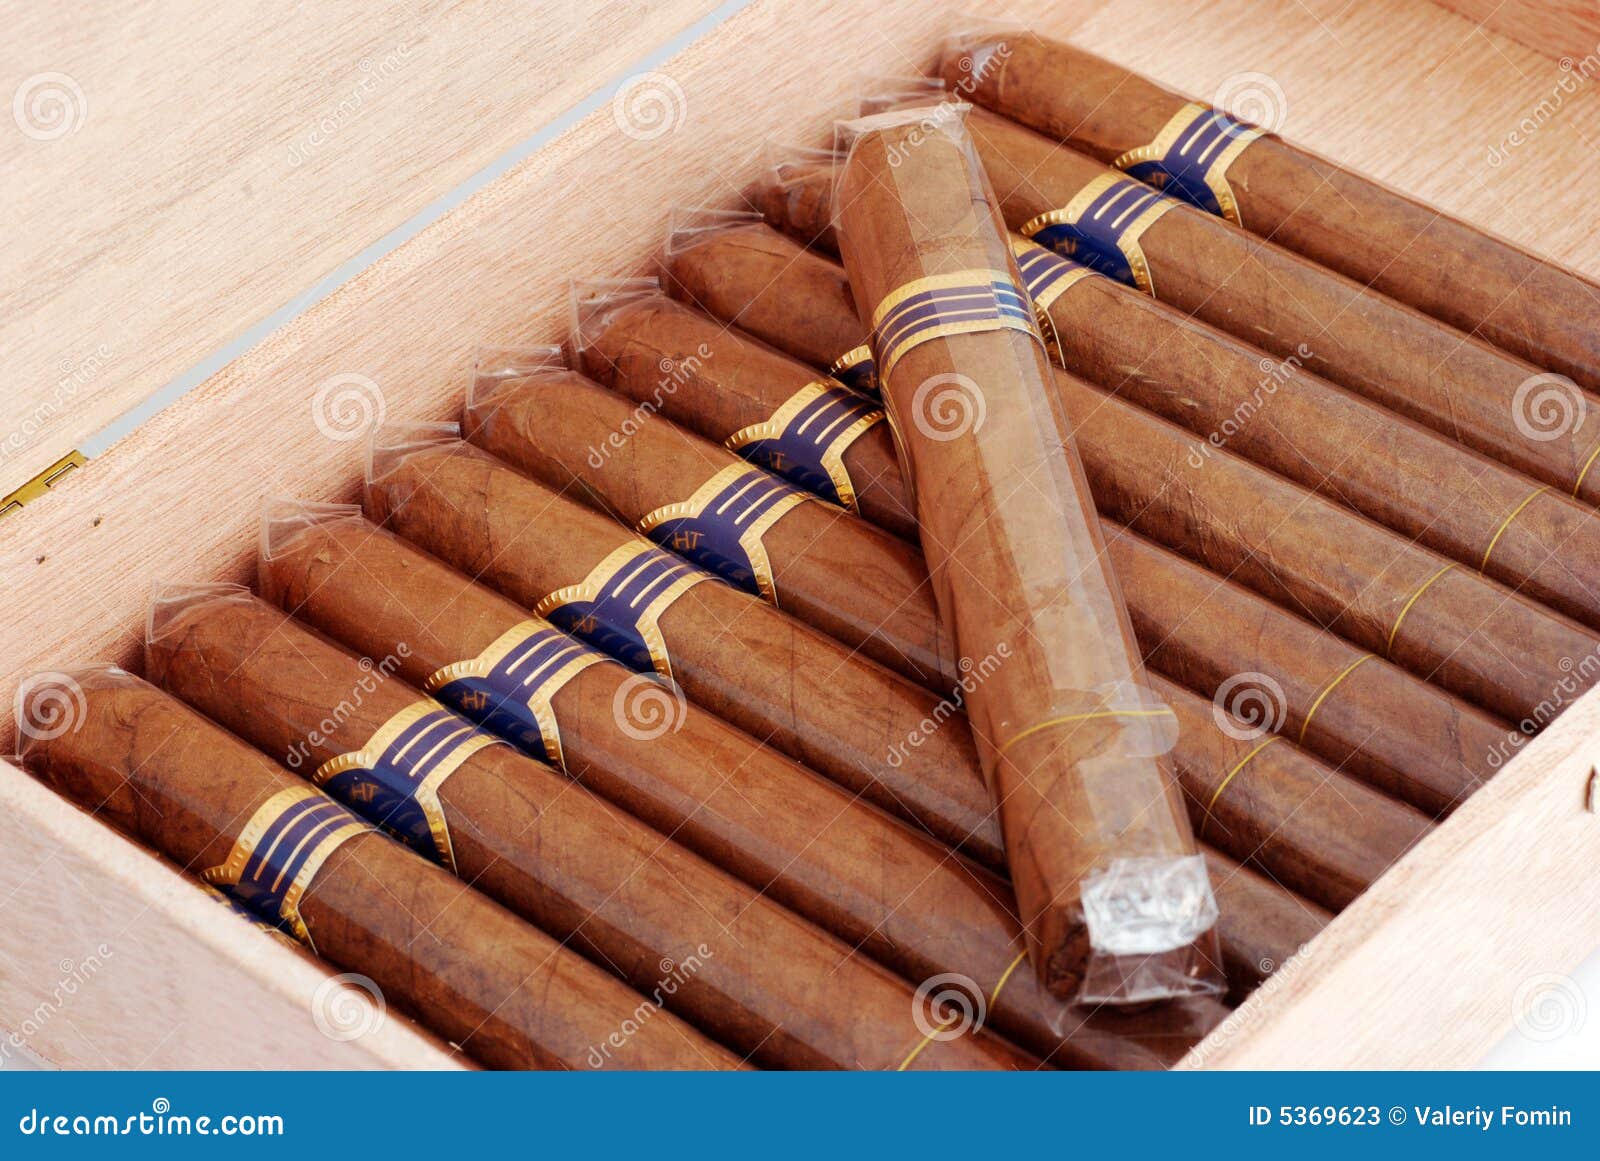 cigars in a humidor